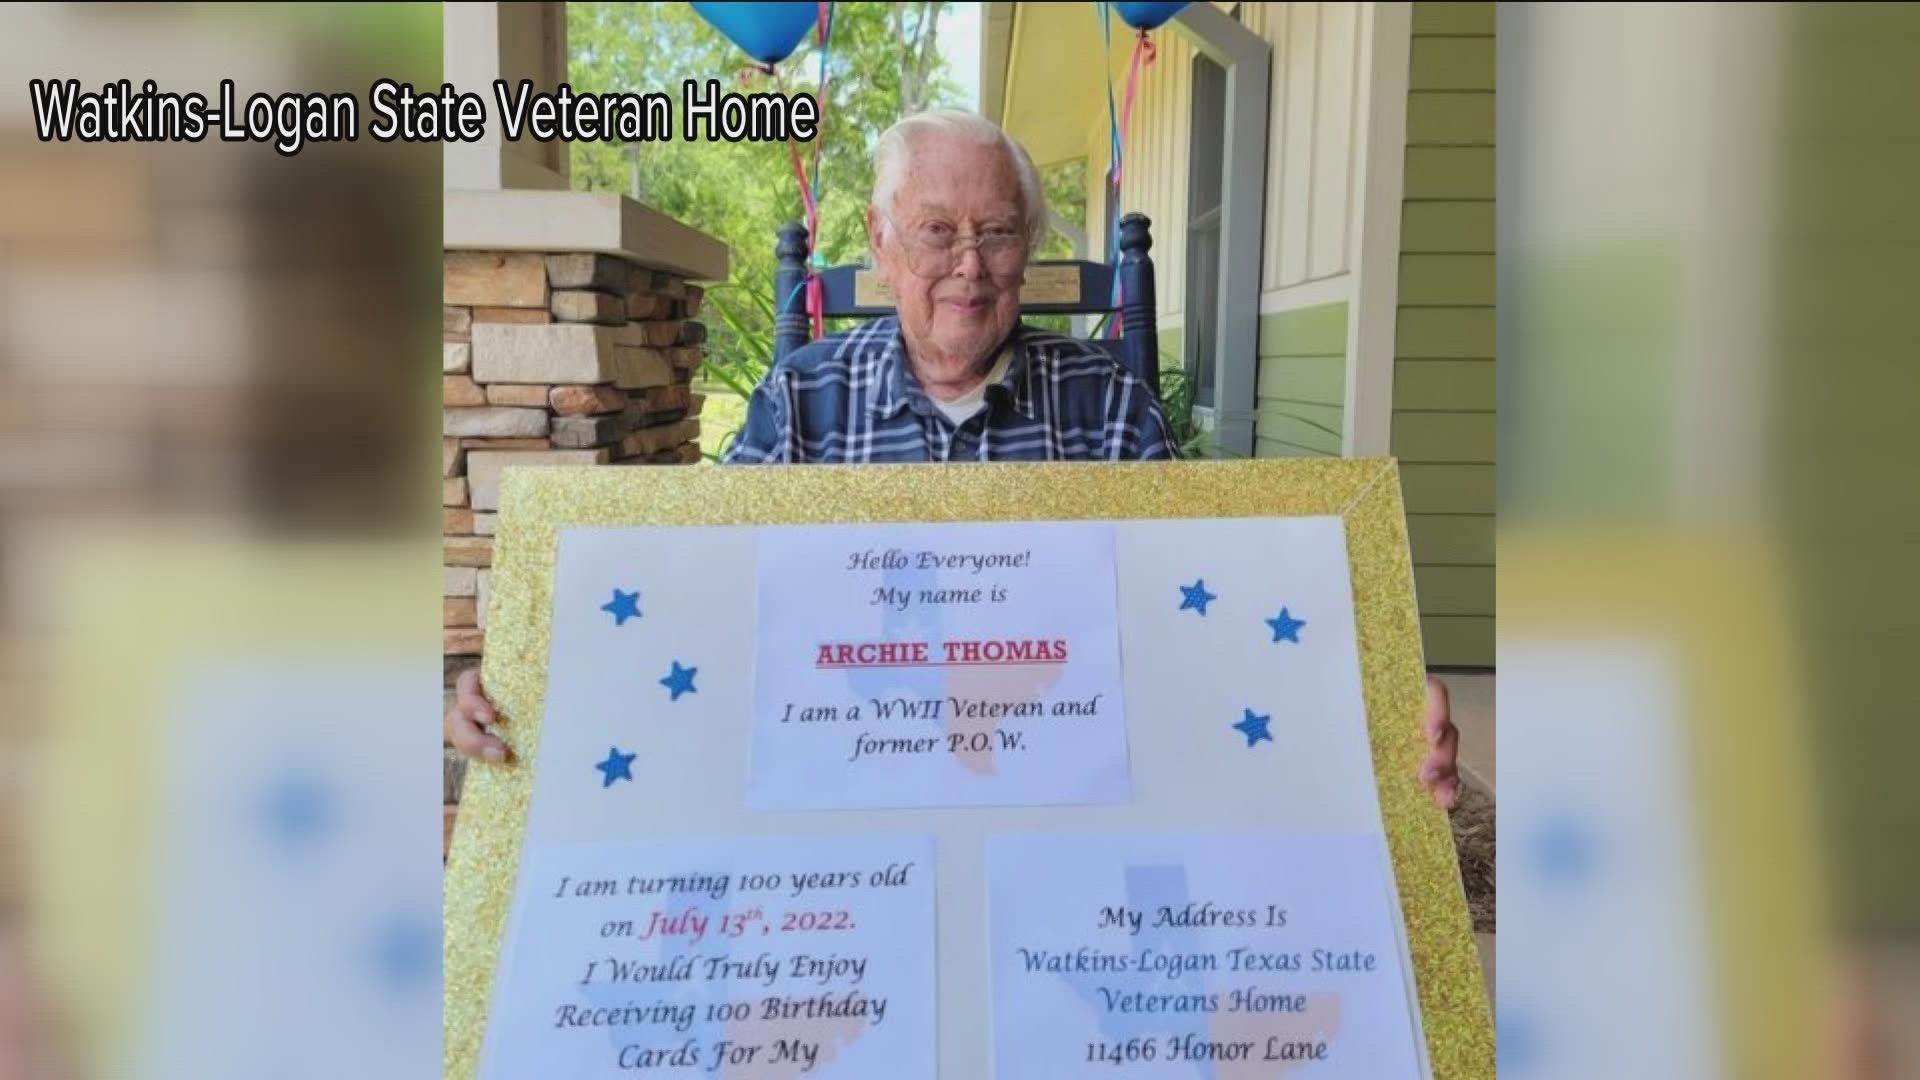 Archie Thomas, an Army Air Corp Veteran and former prisoner of war, turns 100 years old next Wednesday and for his birthday he wants 100s birthday cards